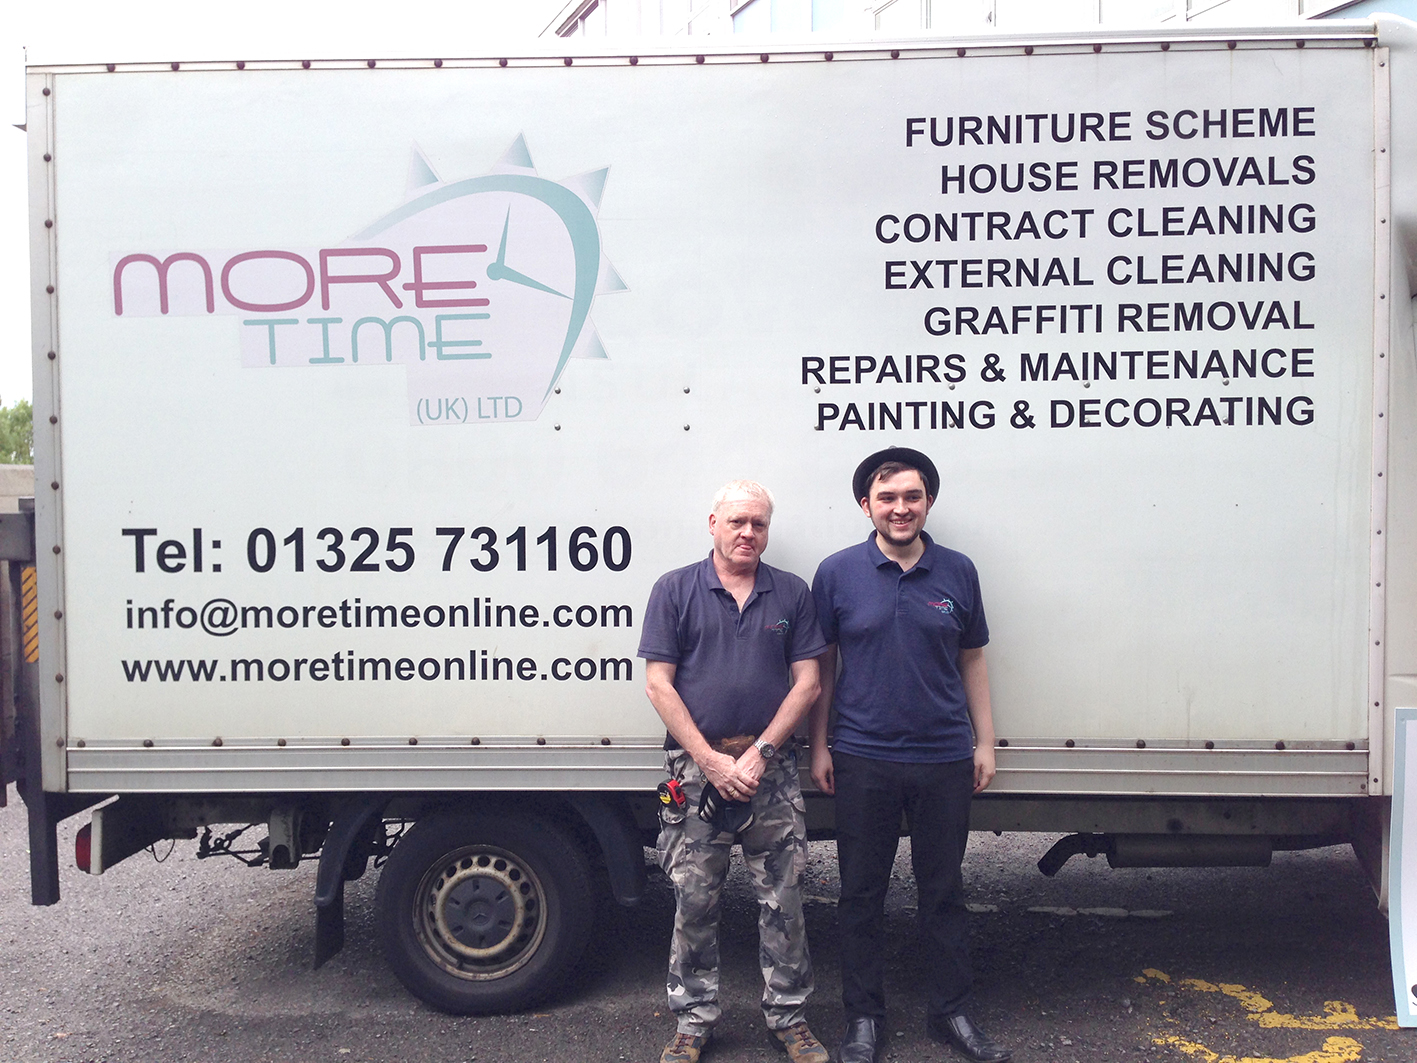 Father & Son Team up at Town’s Furniture Scheme